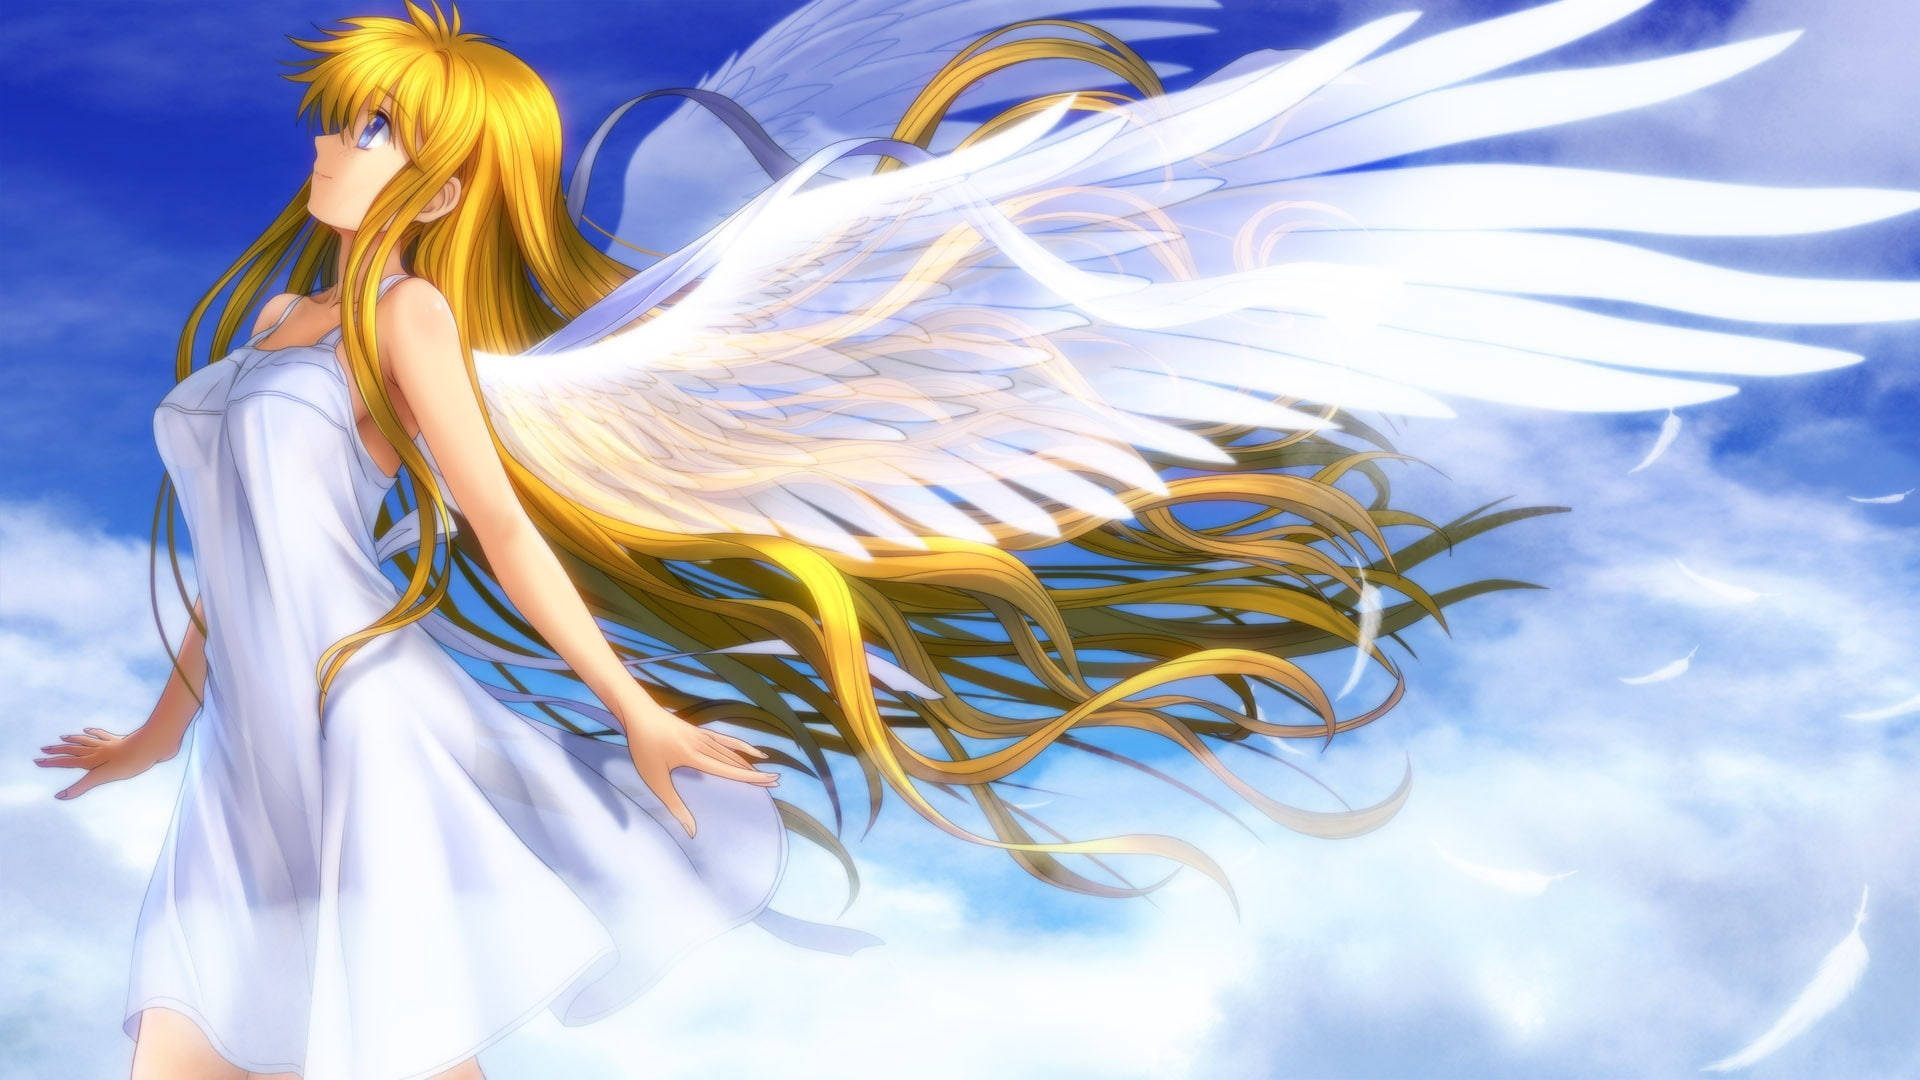 Beautiful Angels With Transparent Wings Wallpaper